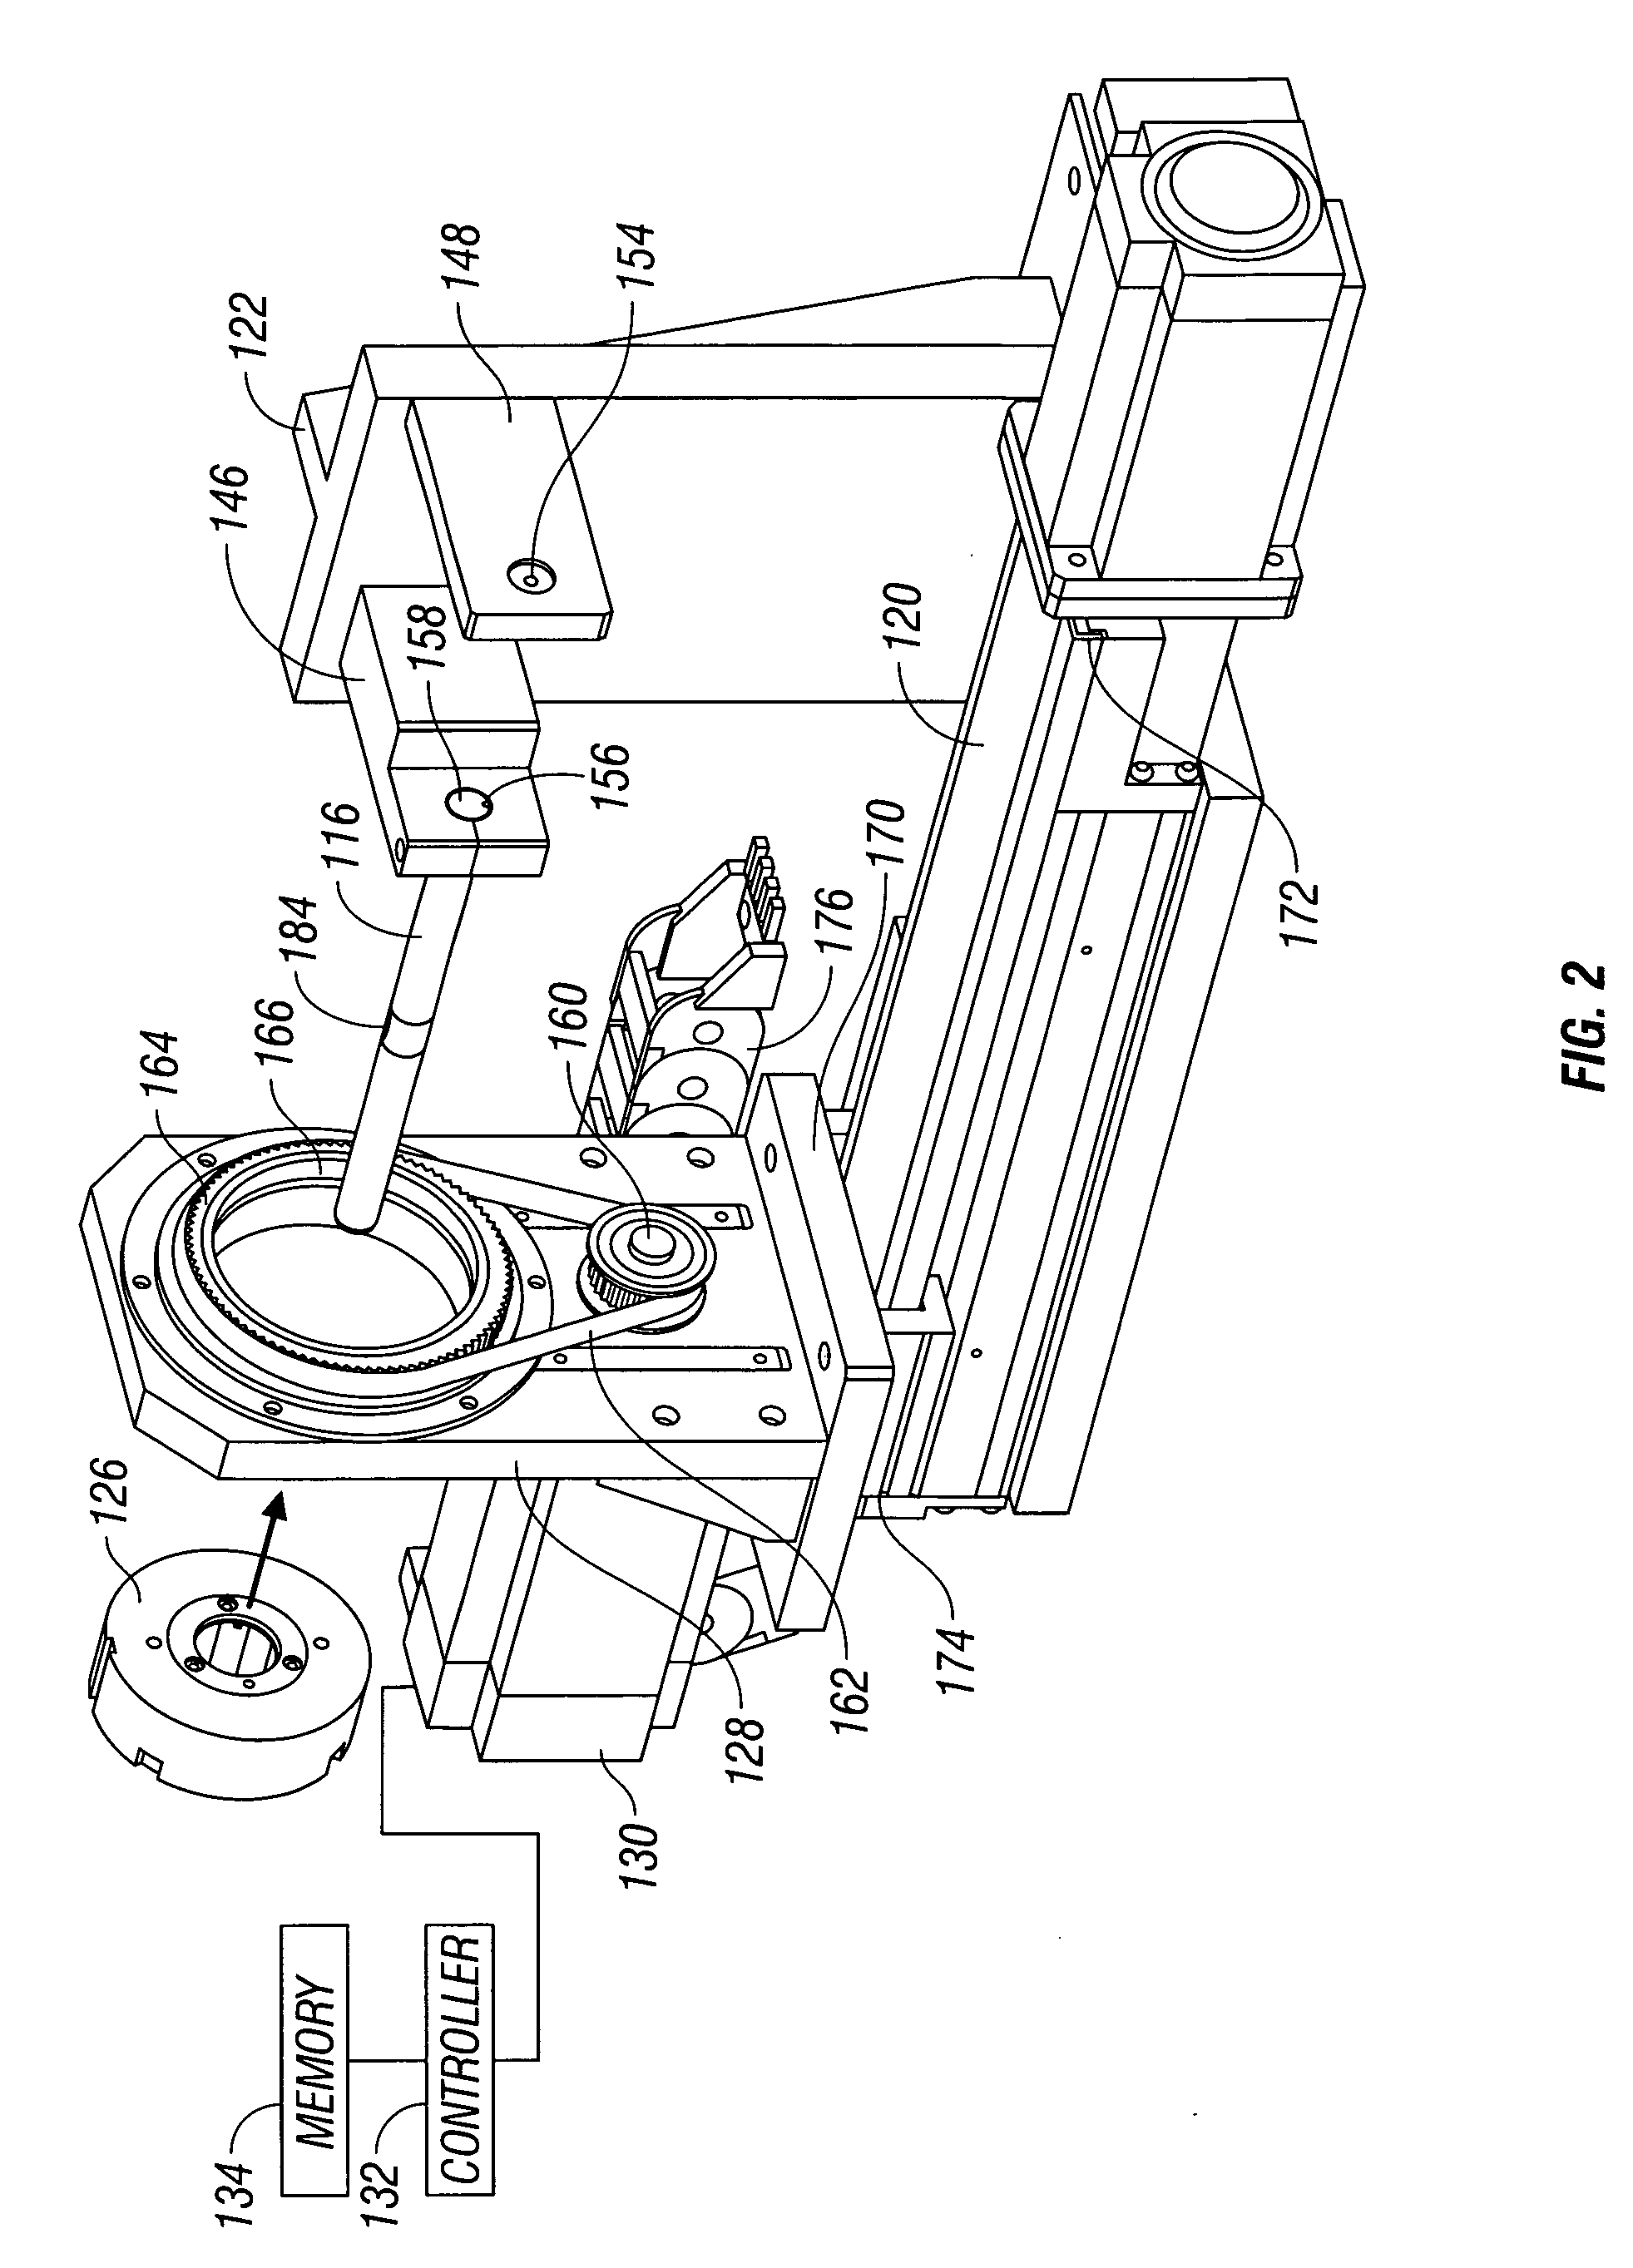 Automatic winder for an inside brushless stator